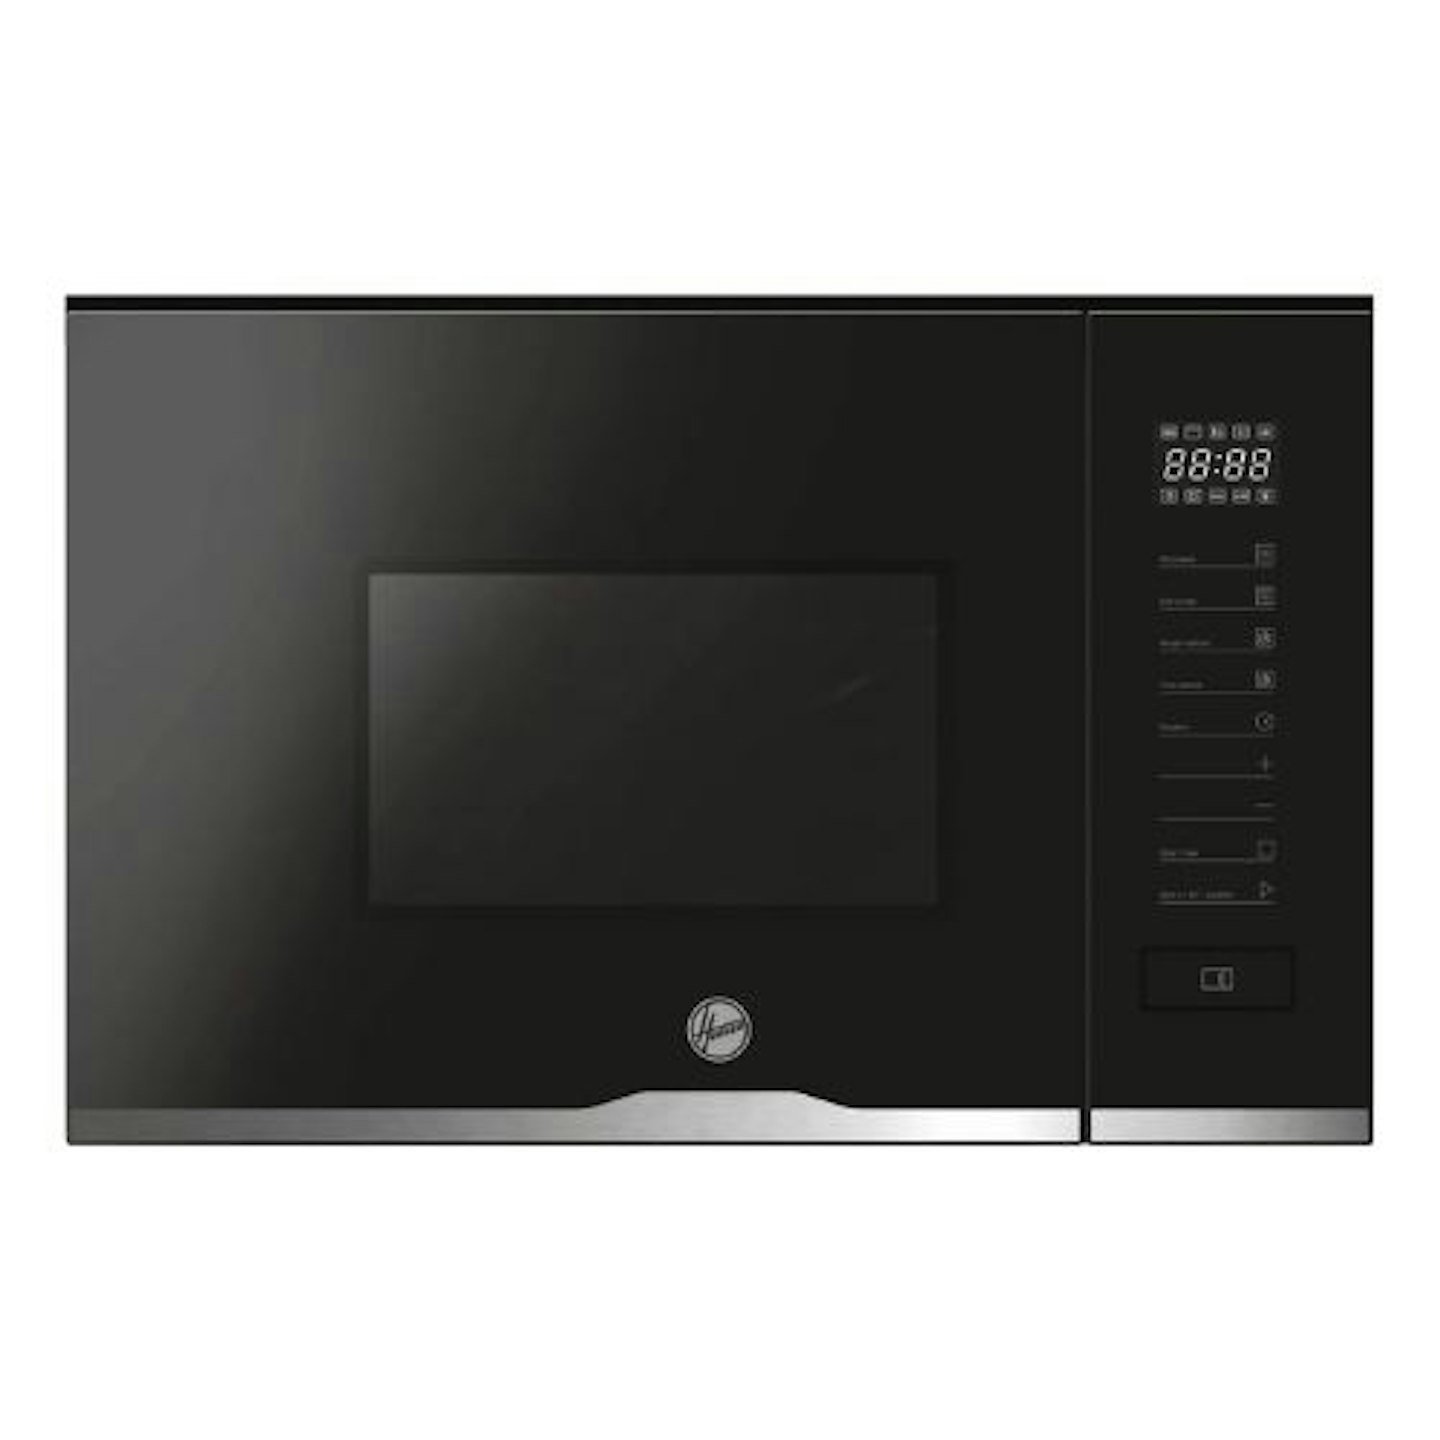 Hoover H-MICROWAVE 500 COMBI HMG20C5SB Built In Combination Microwave Oven - Black